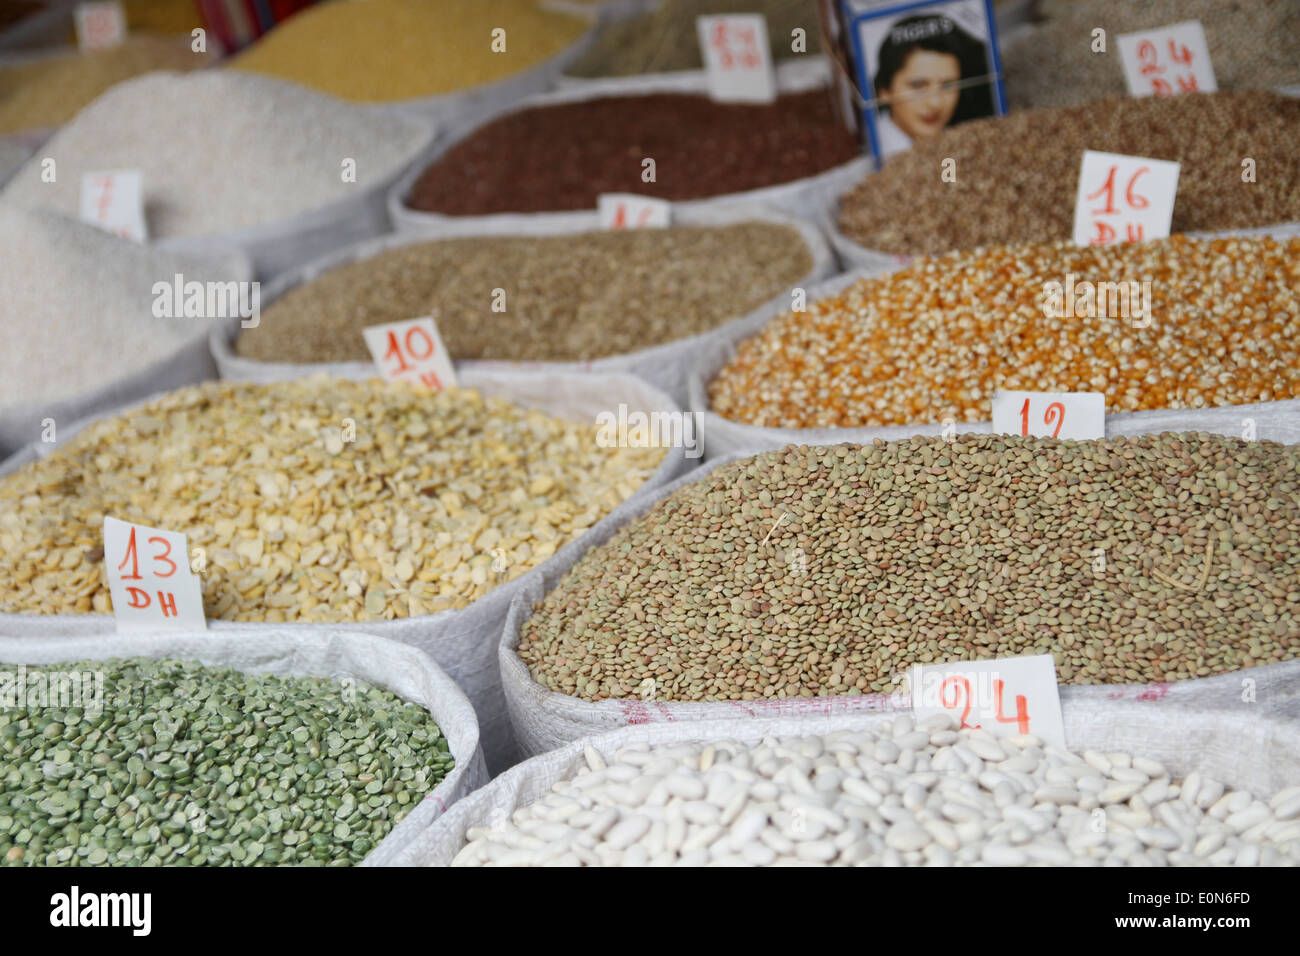 Spices for sale in Chefchaouen, Morocco Stock Photo